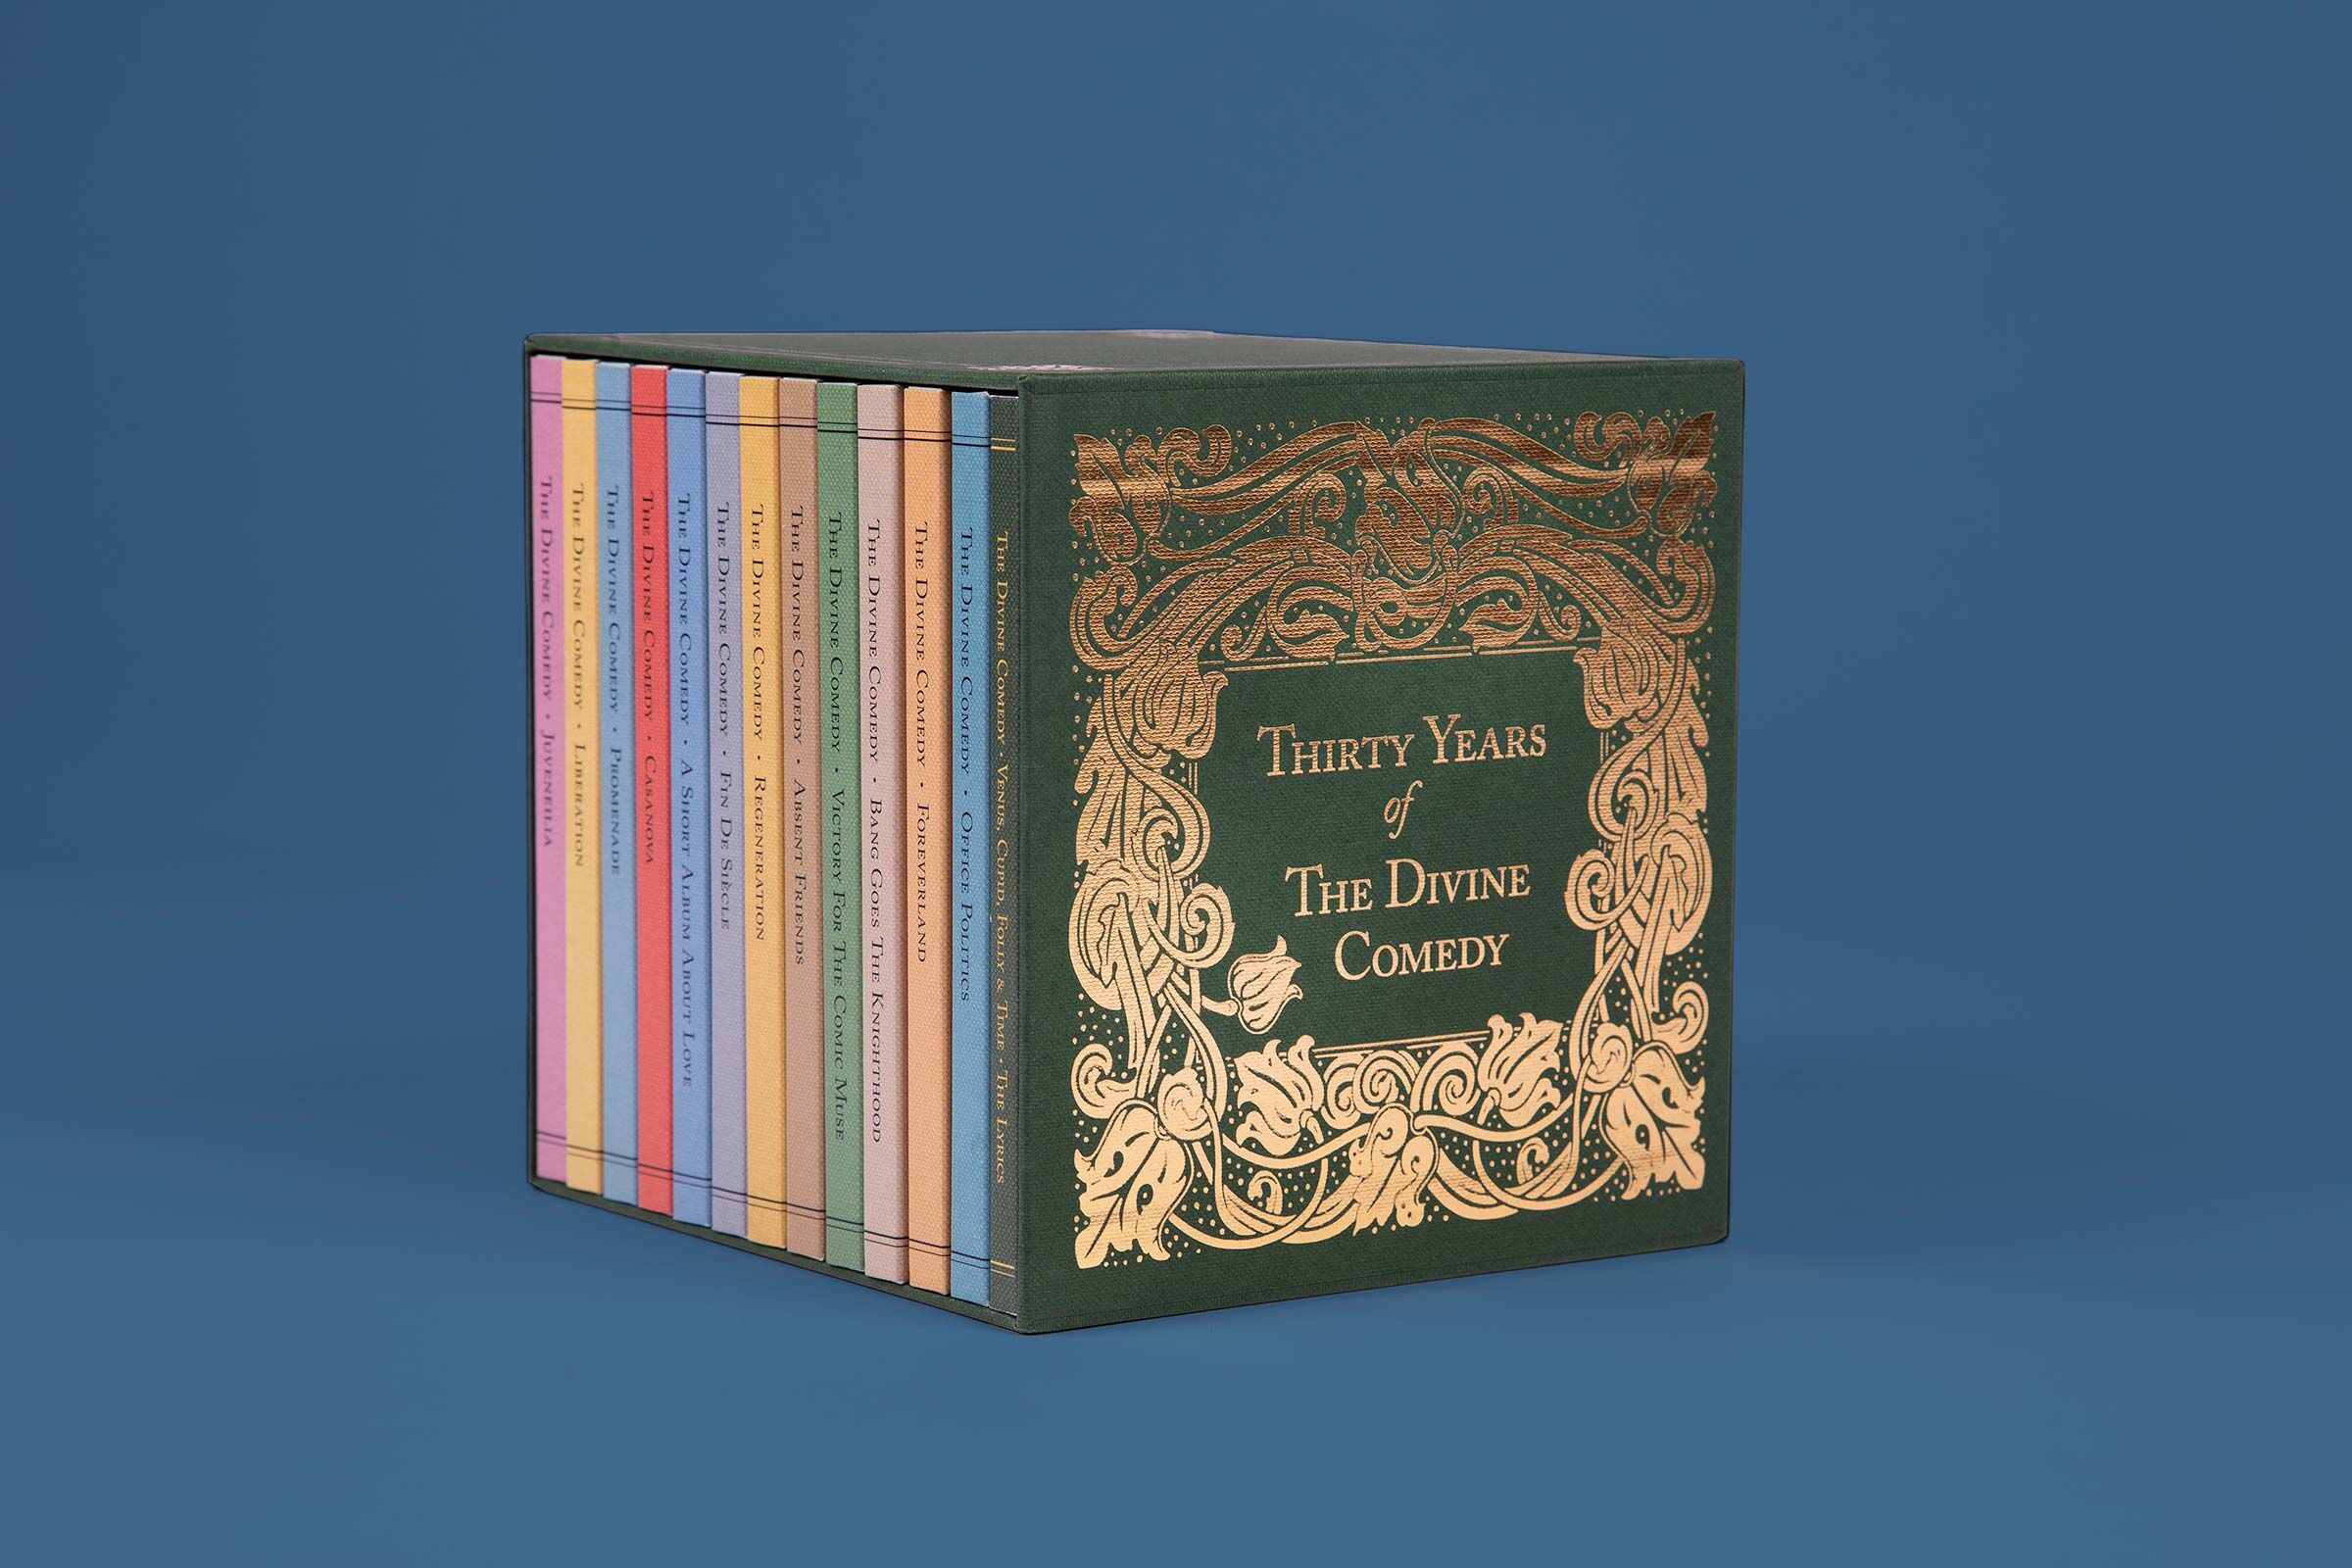 The Divine Comedy Venus, Cupid, Folly and Time Anniversary Edition with Rigid outer box, wrapped with green cloth-effect